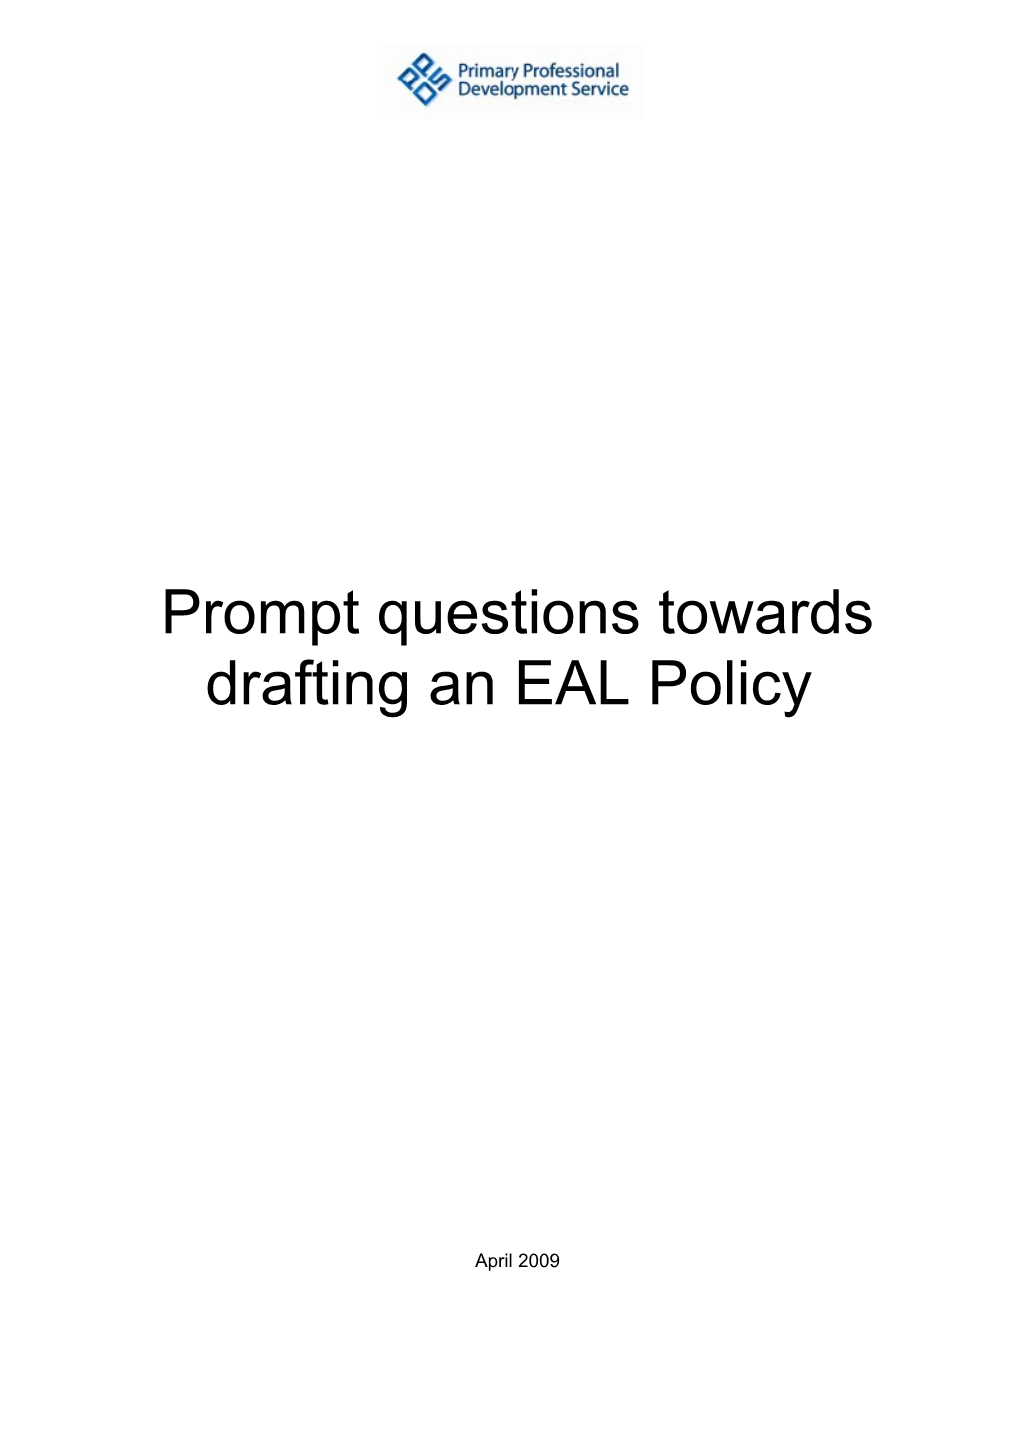 Prompt Questions Towards Drafting an EAL Policy